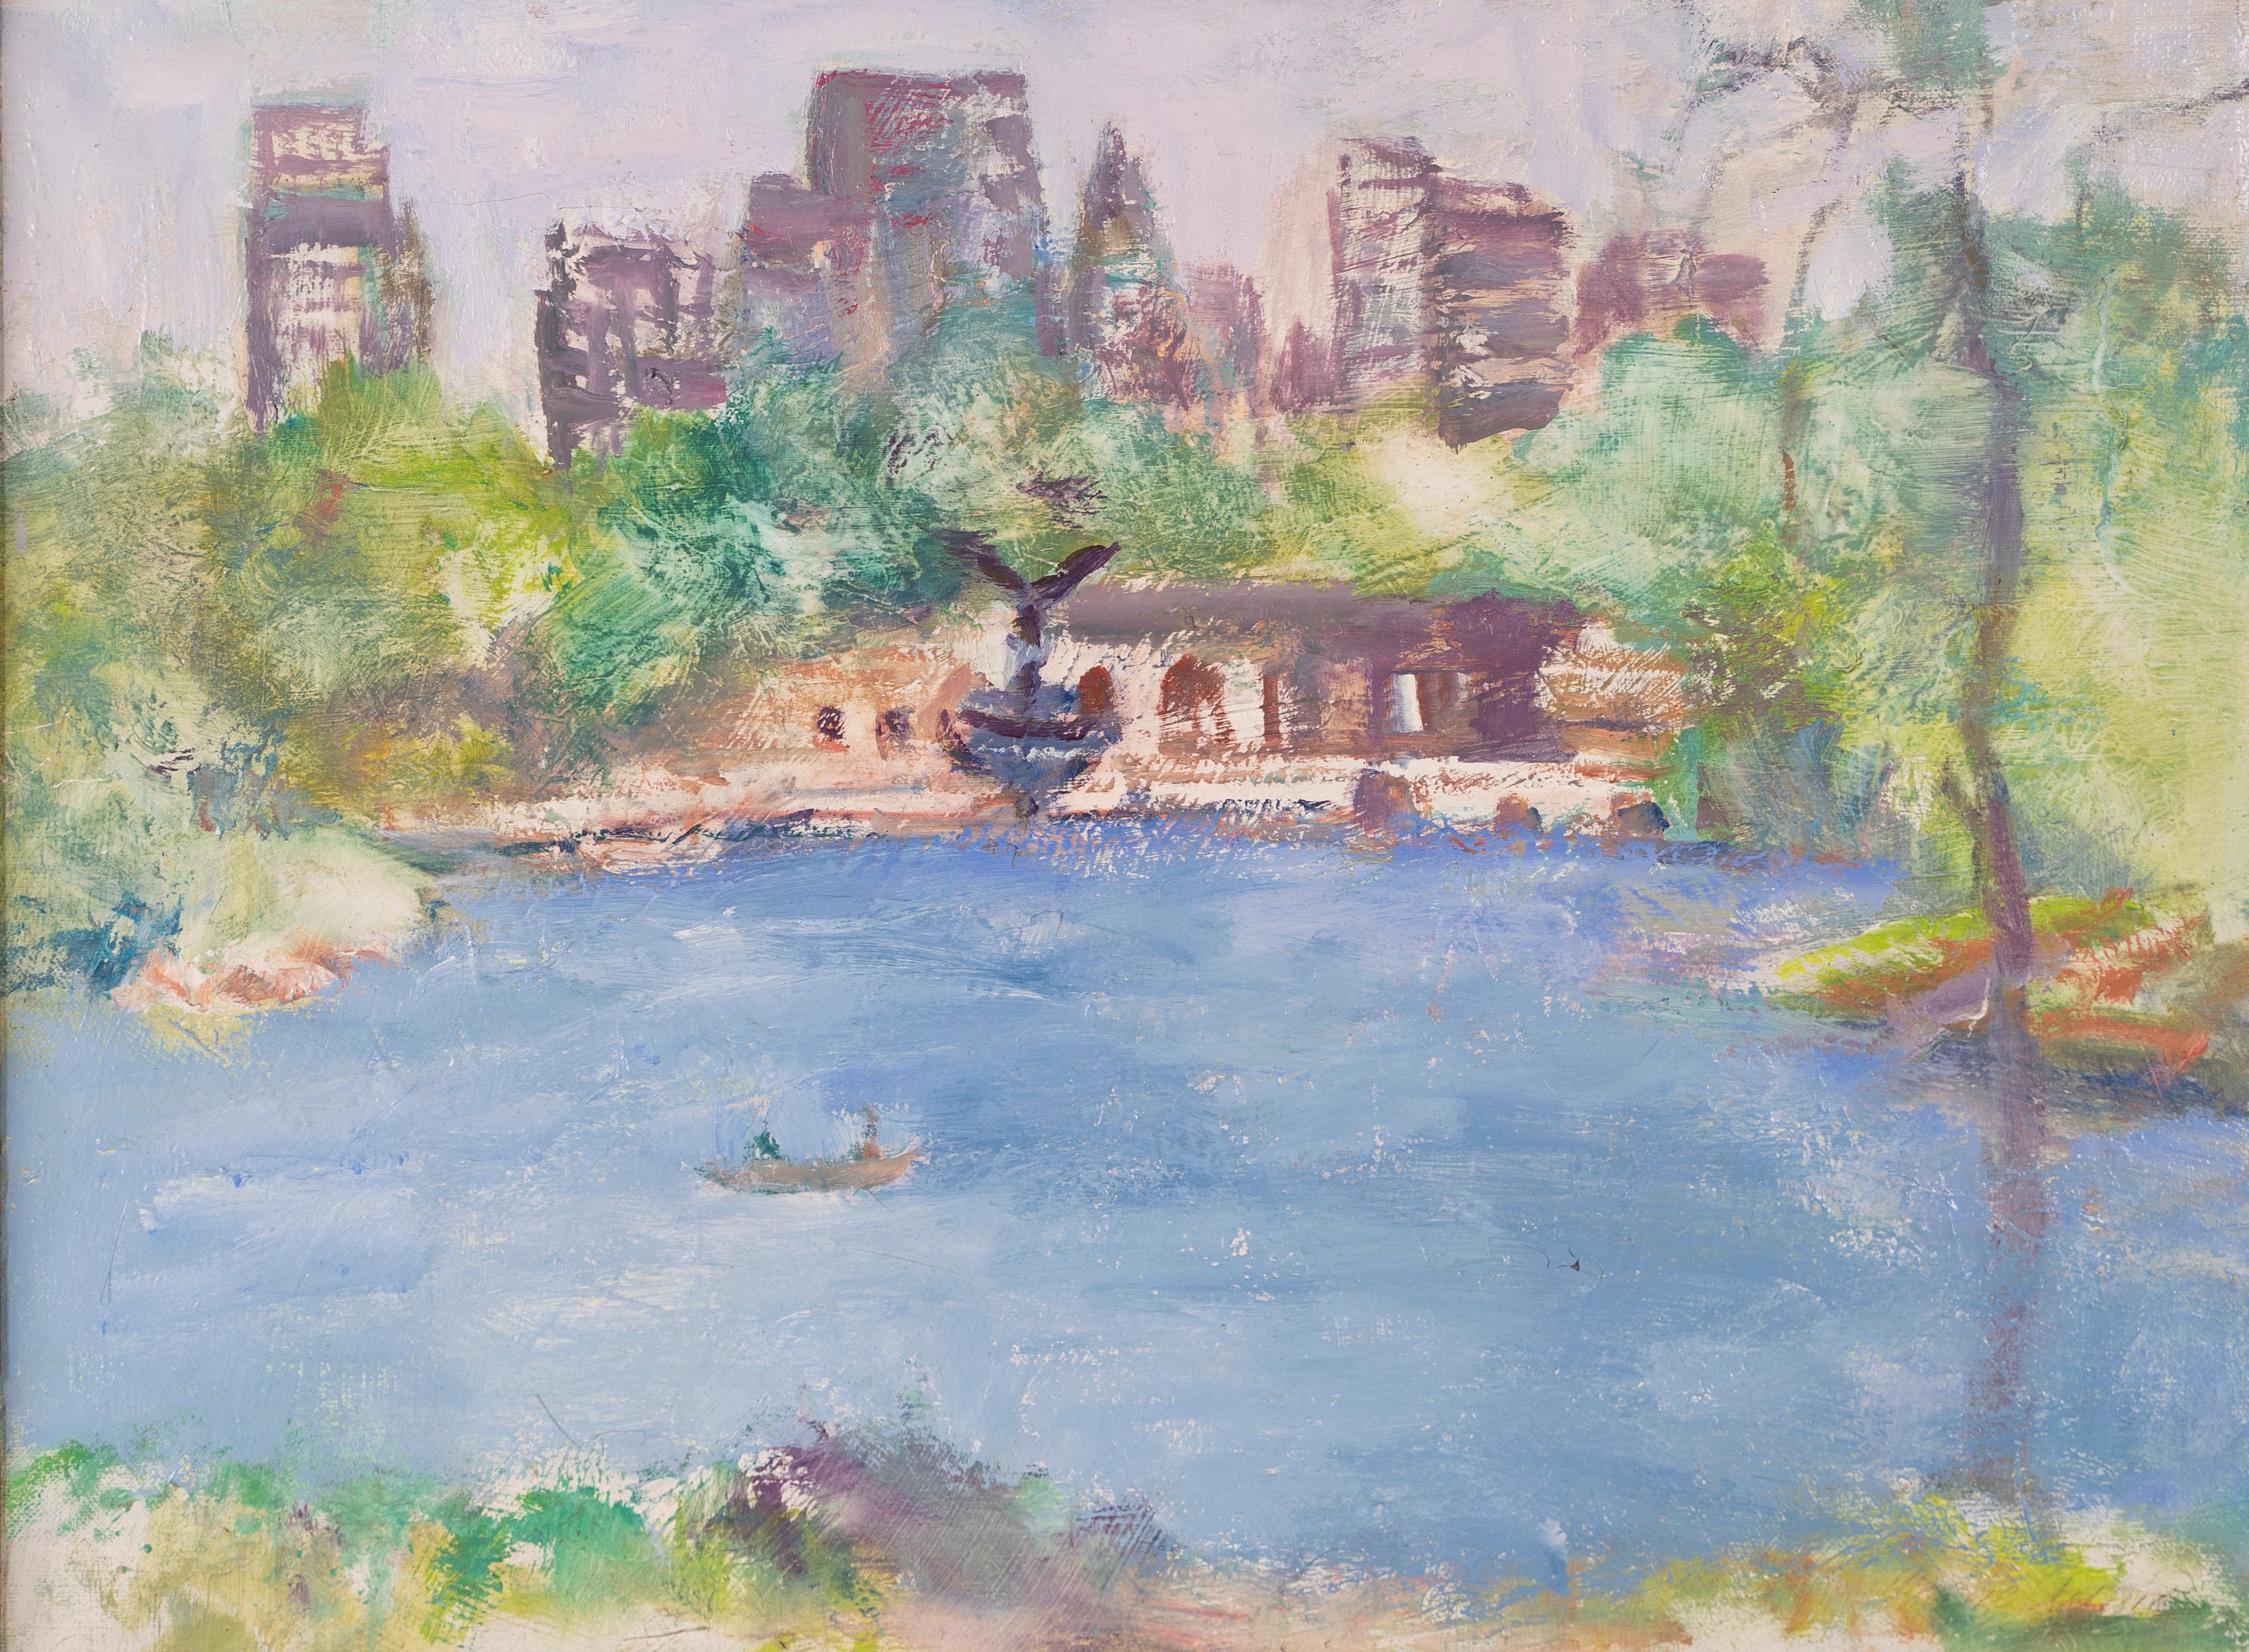 Vintage American modernist painting of central park.  Oil on canvas, circa 1950.  Signed.  Framed.  Image size, 24